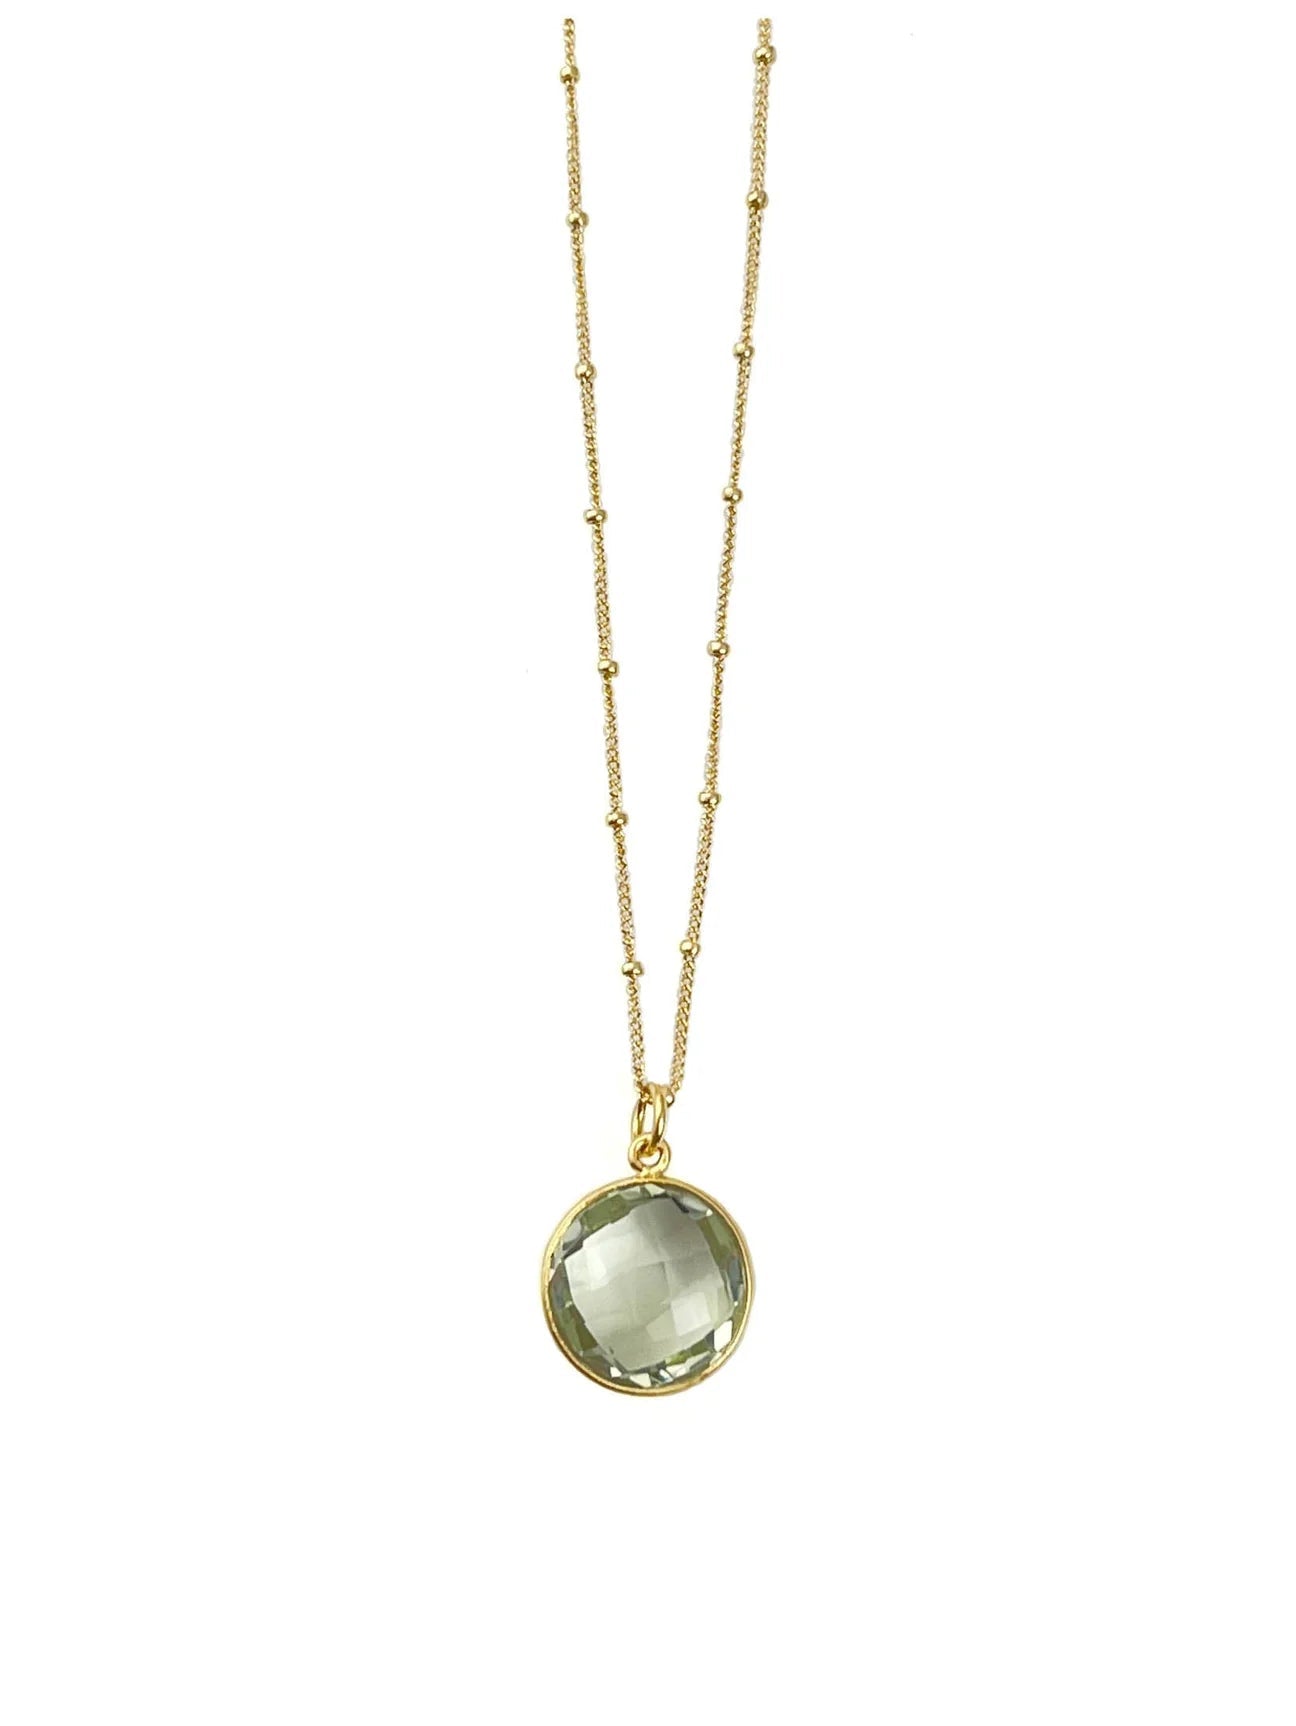 round green amethyst necklace - The Riviera Towel Company